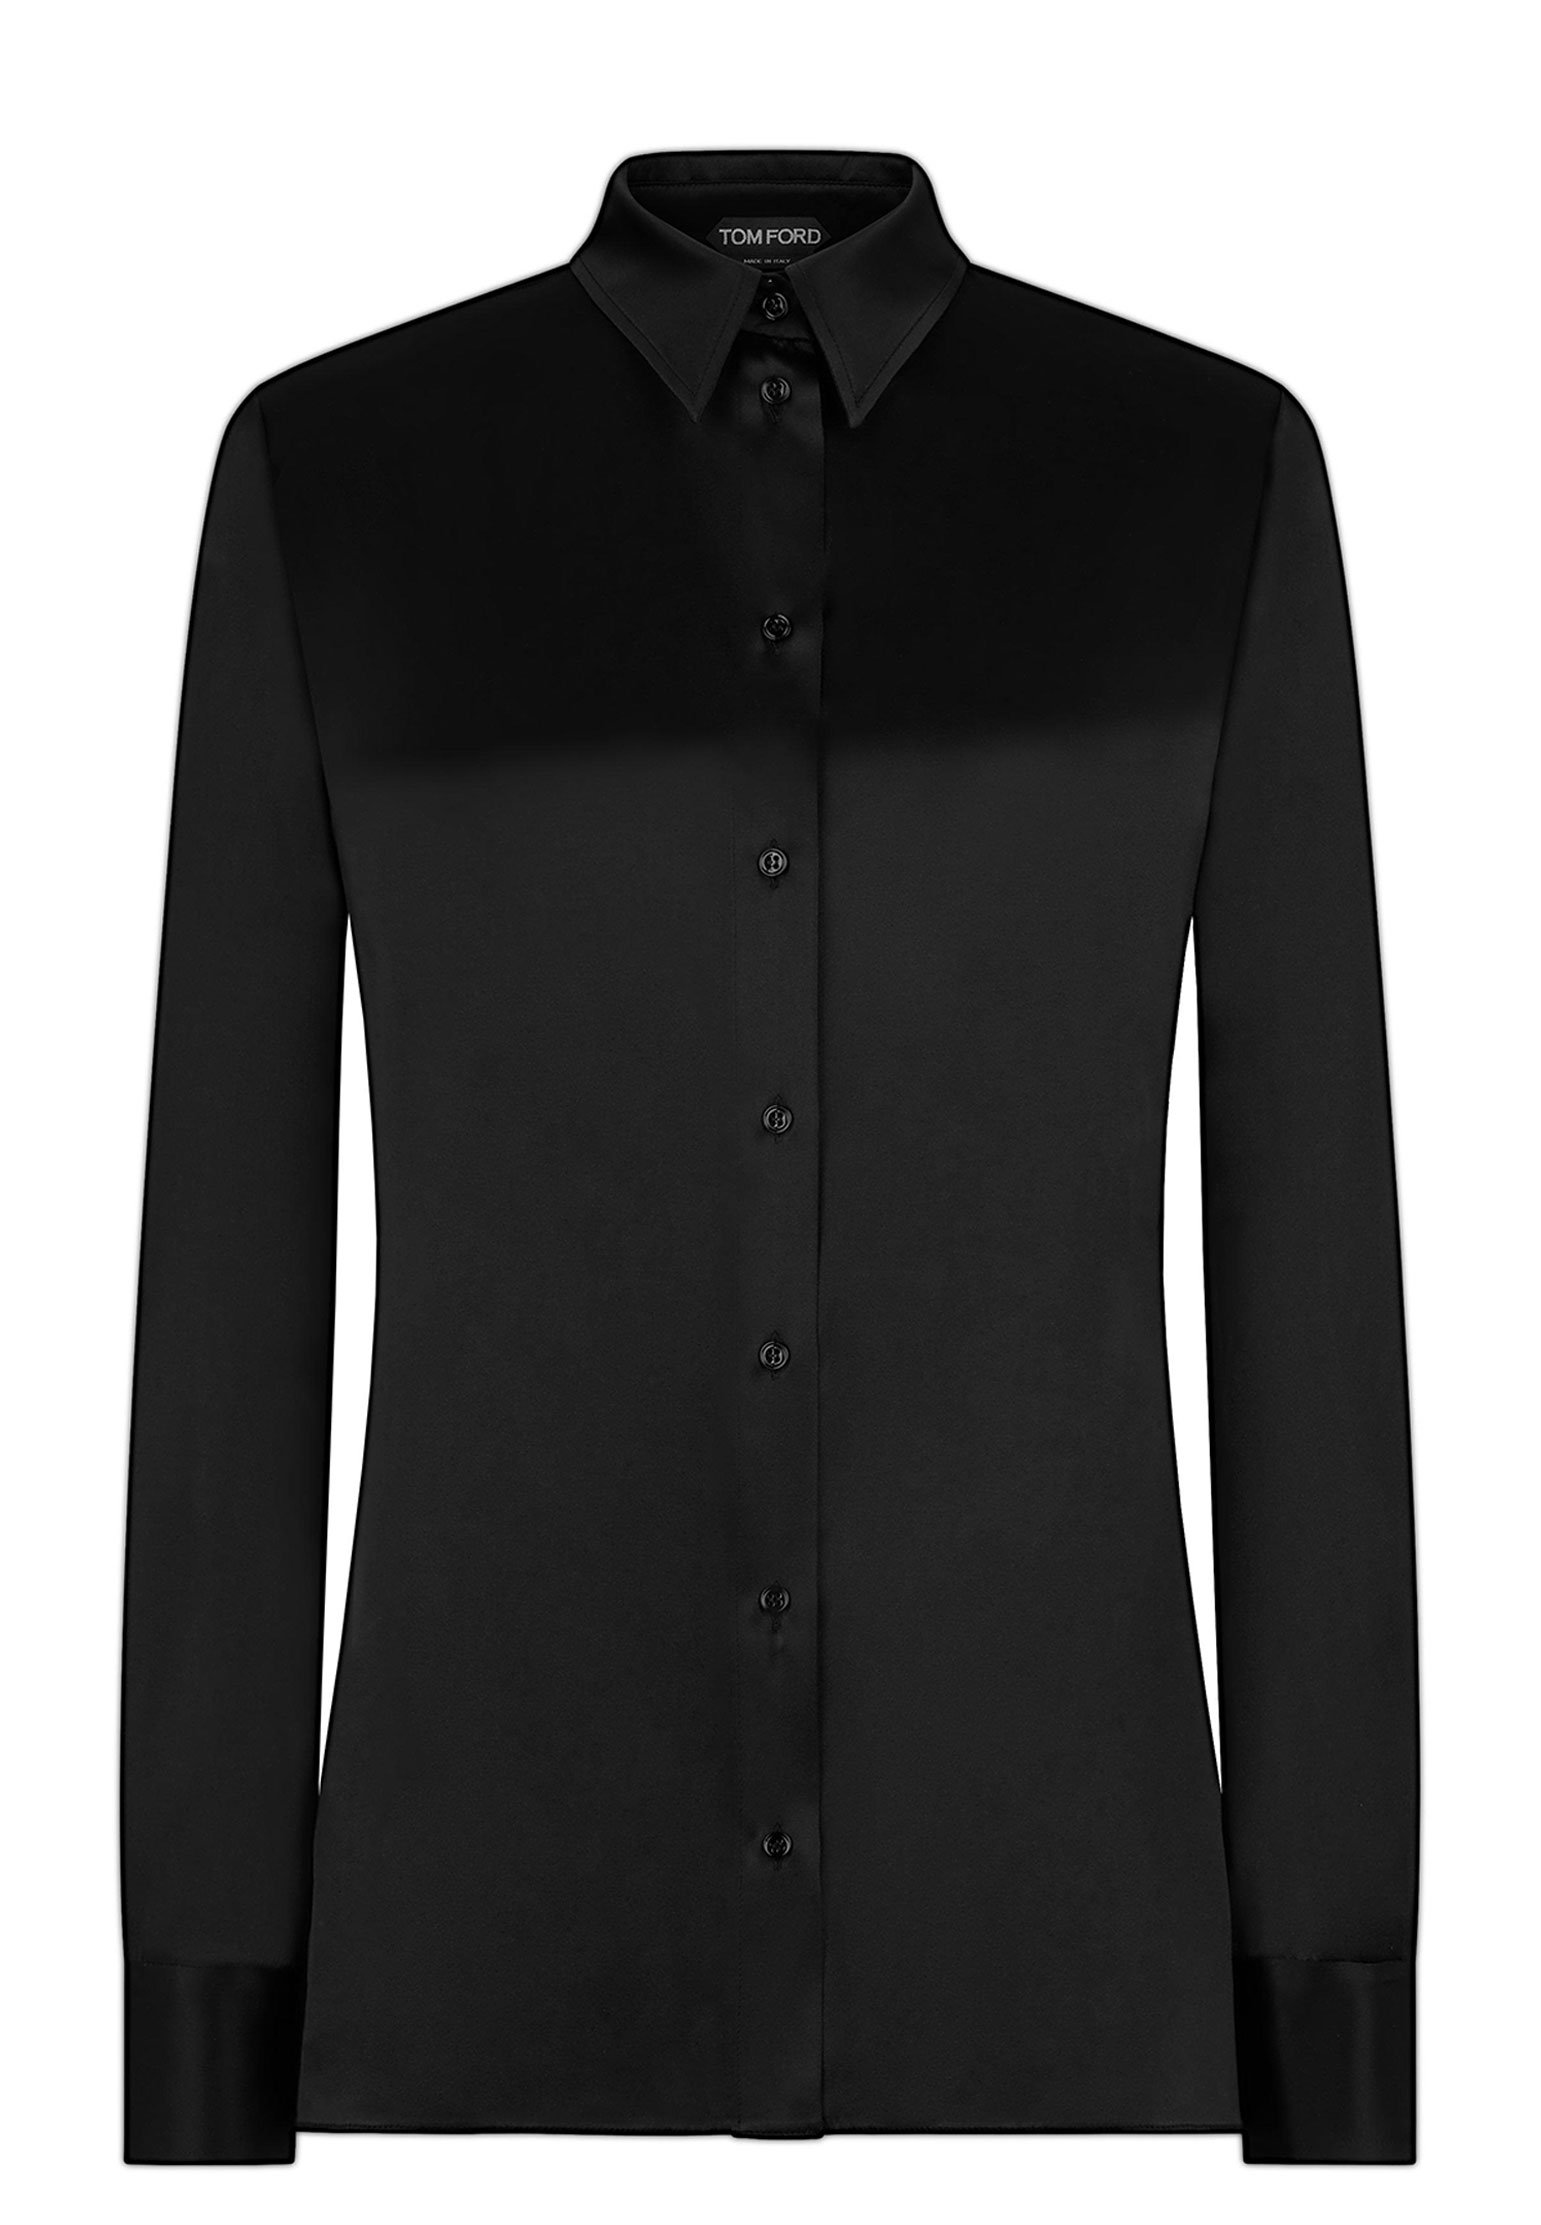 Shirt TOM FORD Color: black (Code: 1930) in online store Allure